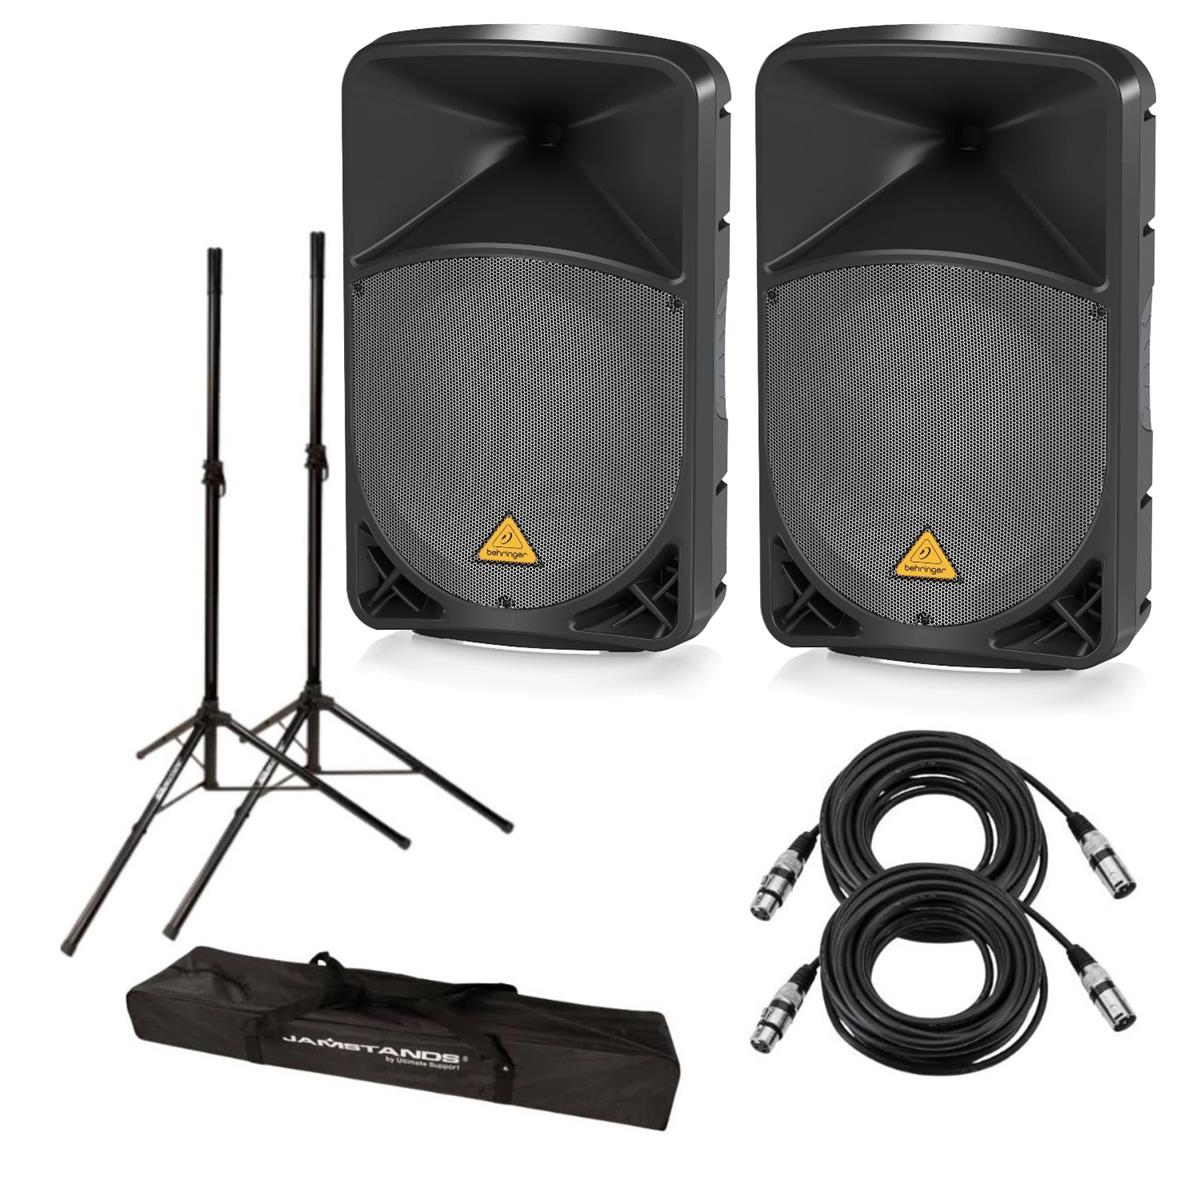 ctive 1000-Watt 2-Way 15" PA Speaker W/ 2x Mic Cable/Stand Pair - Behringer B115D A